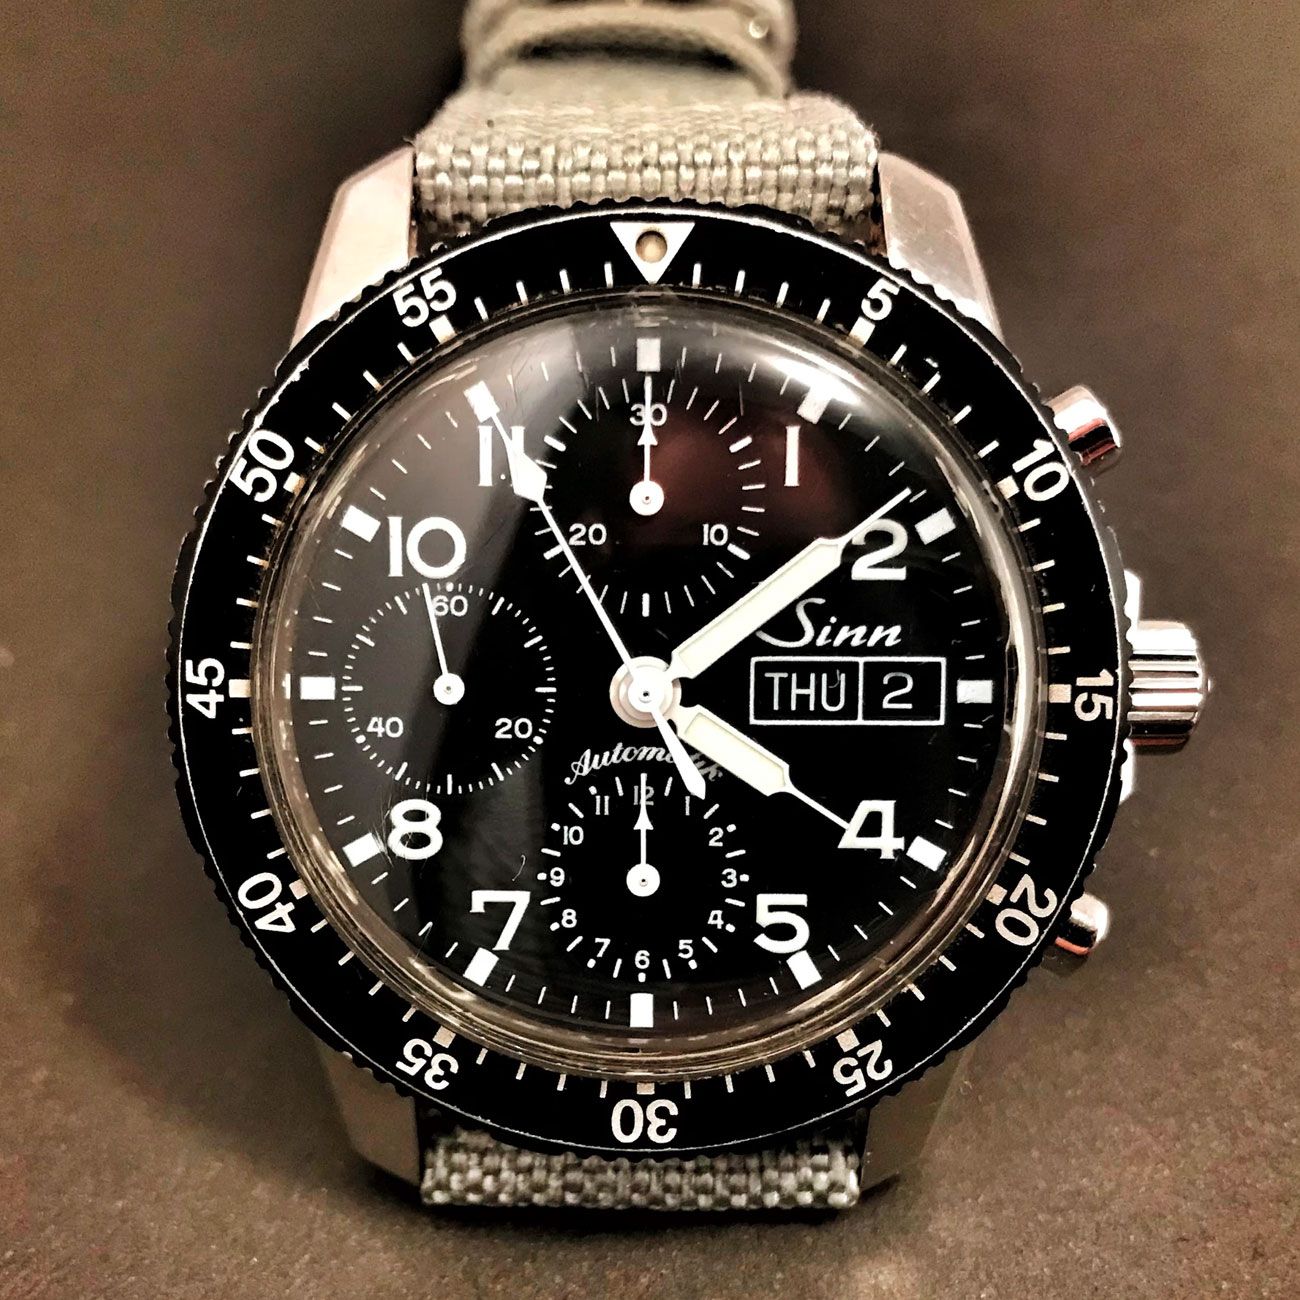 The Valjoux 7750 Chronograph Is a 